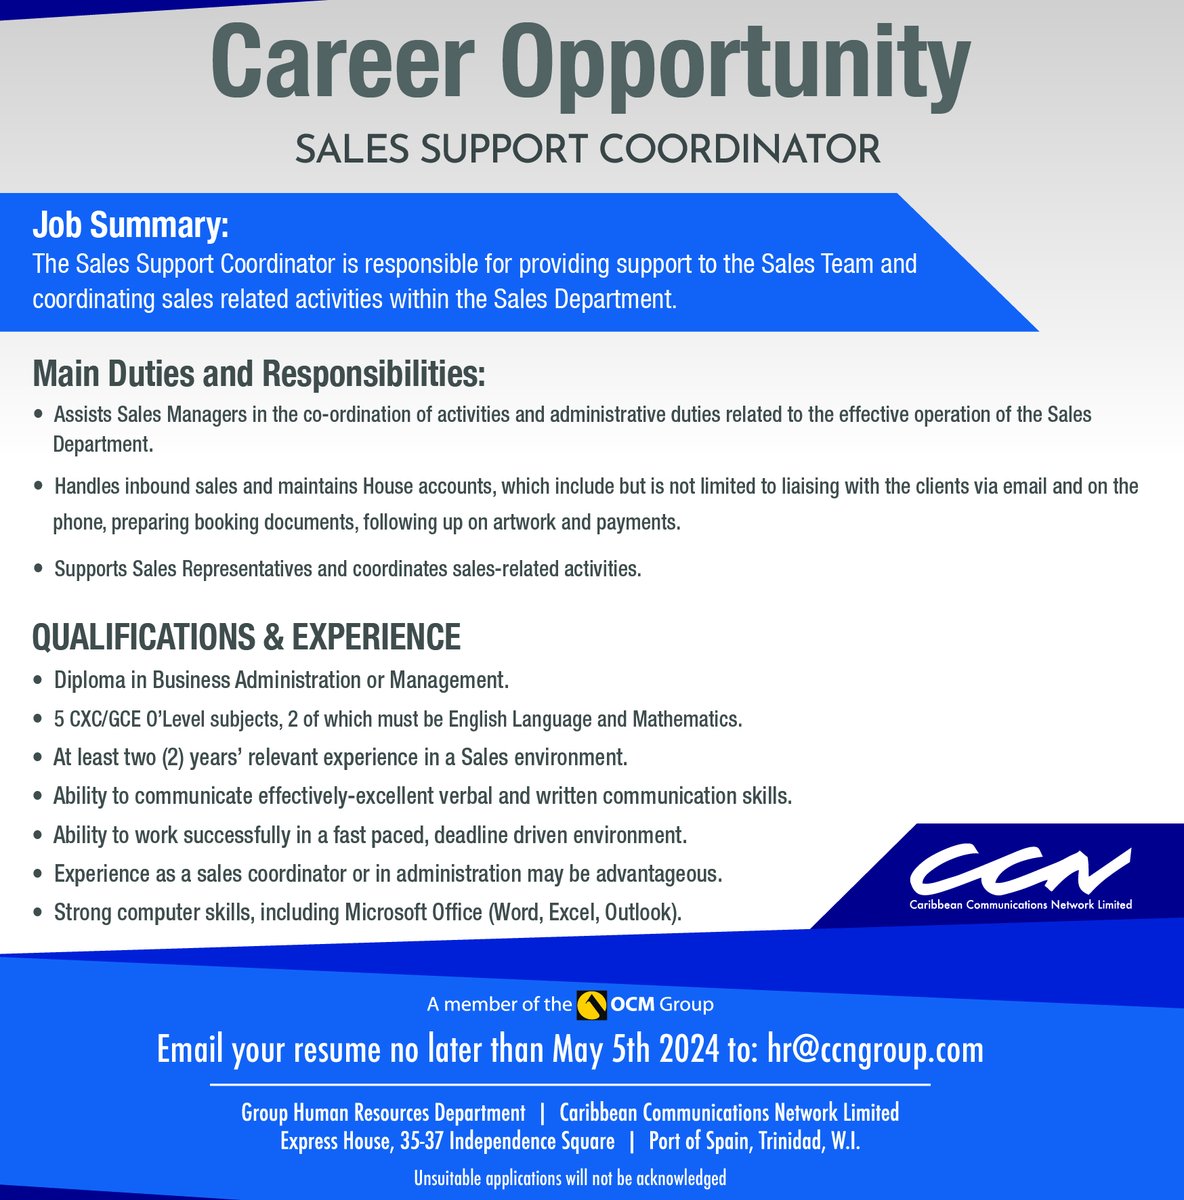 #JobOpportunity ✅Do you have Diploma in Business Administration or Management? We are looking for a Sales Support Coordinator👩‍💻 for our Sales Department. 👉Interested applicants please email 📩your resume to hr@ccngroup.com no later than 05th May 2024.